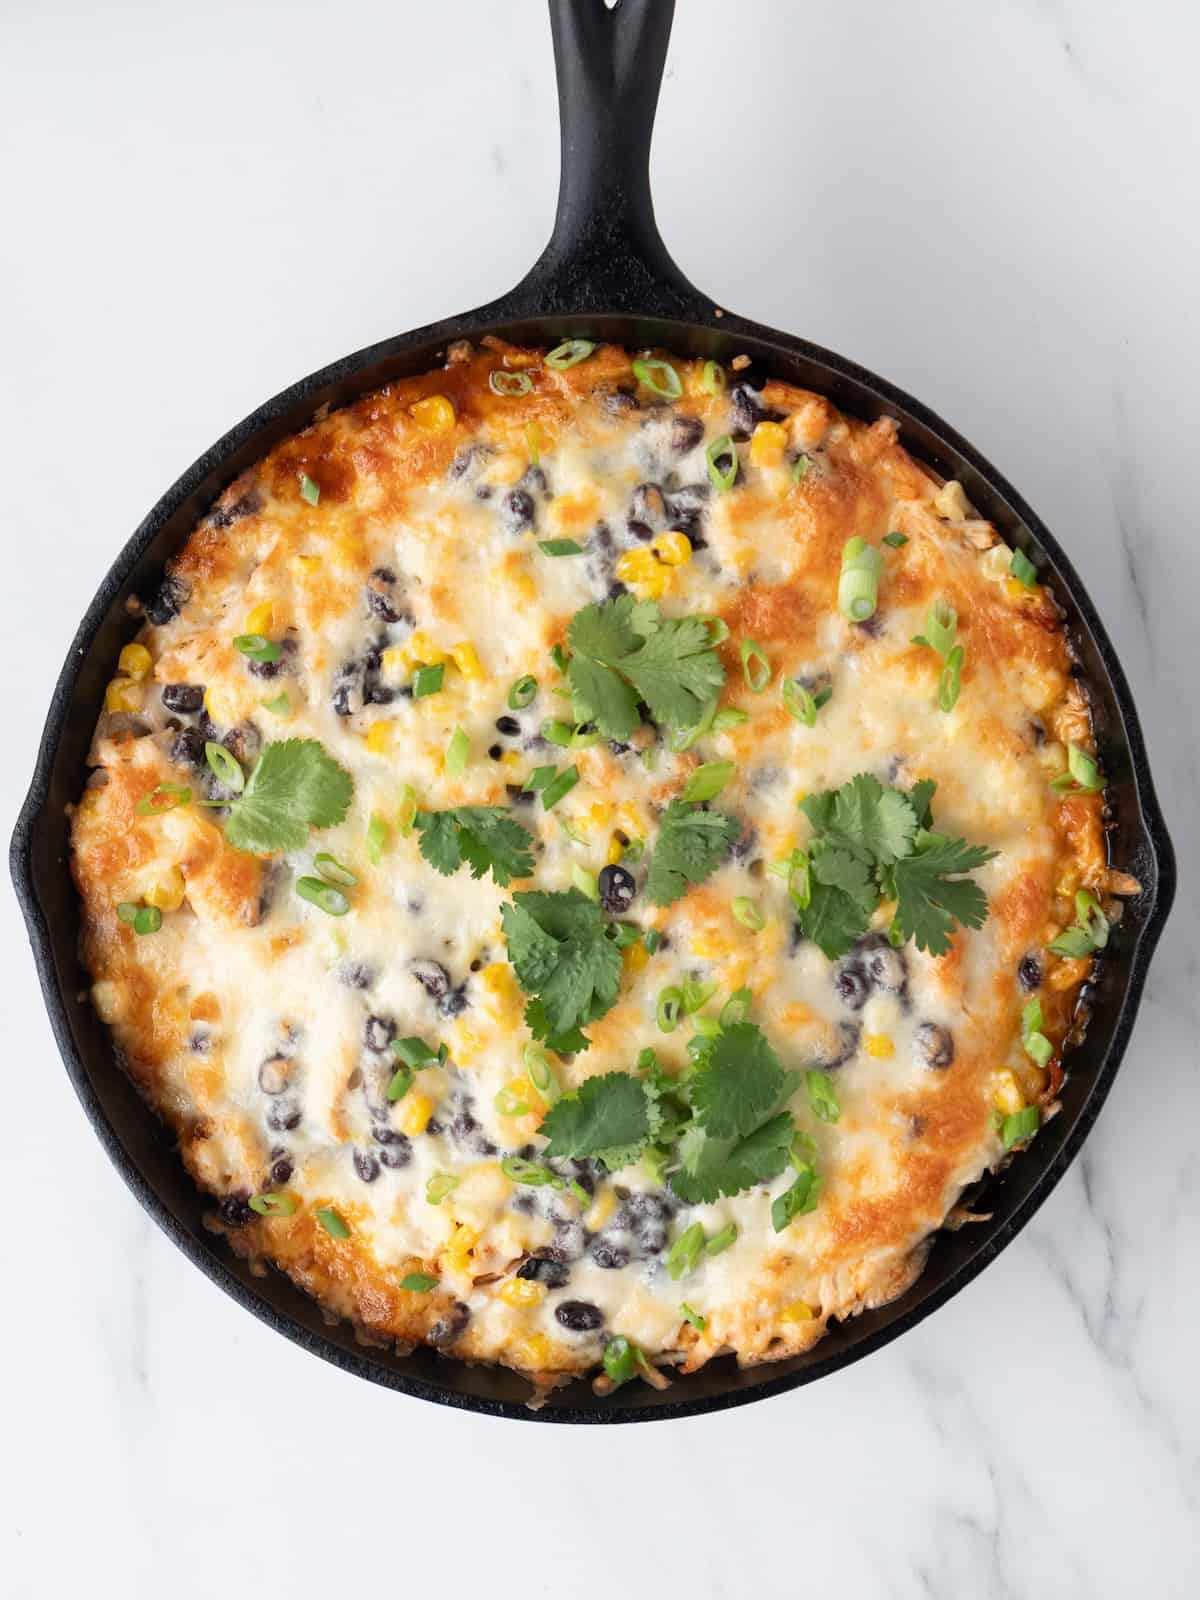 Skillet Chipotle Chicken Enchilada Bake - What's Gaby Cooking